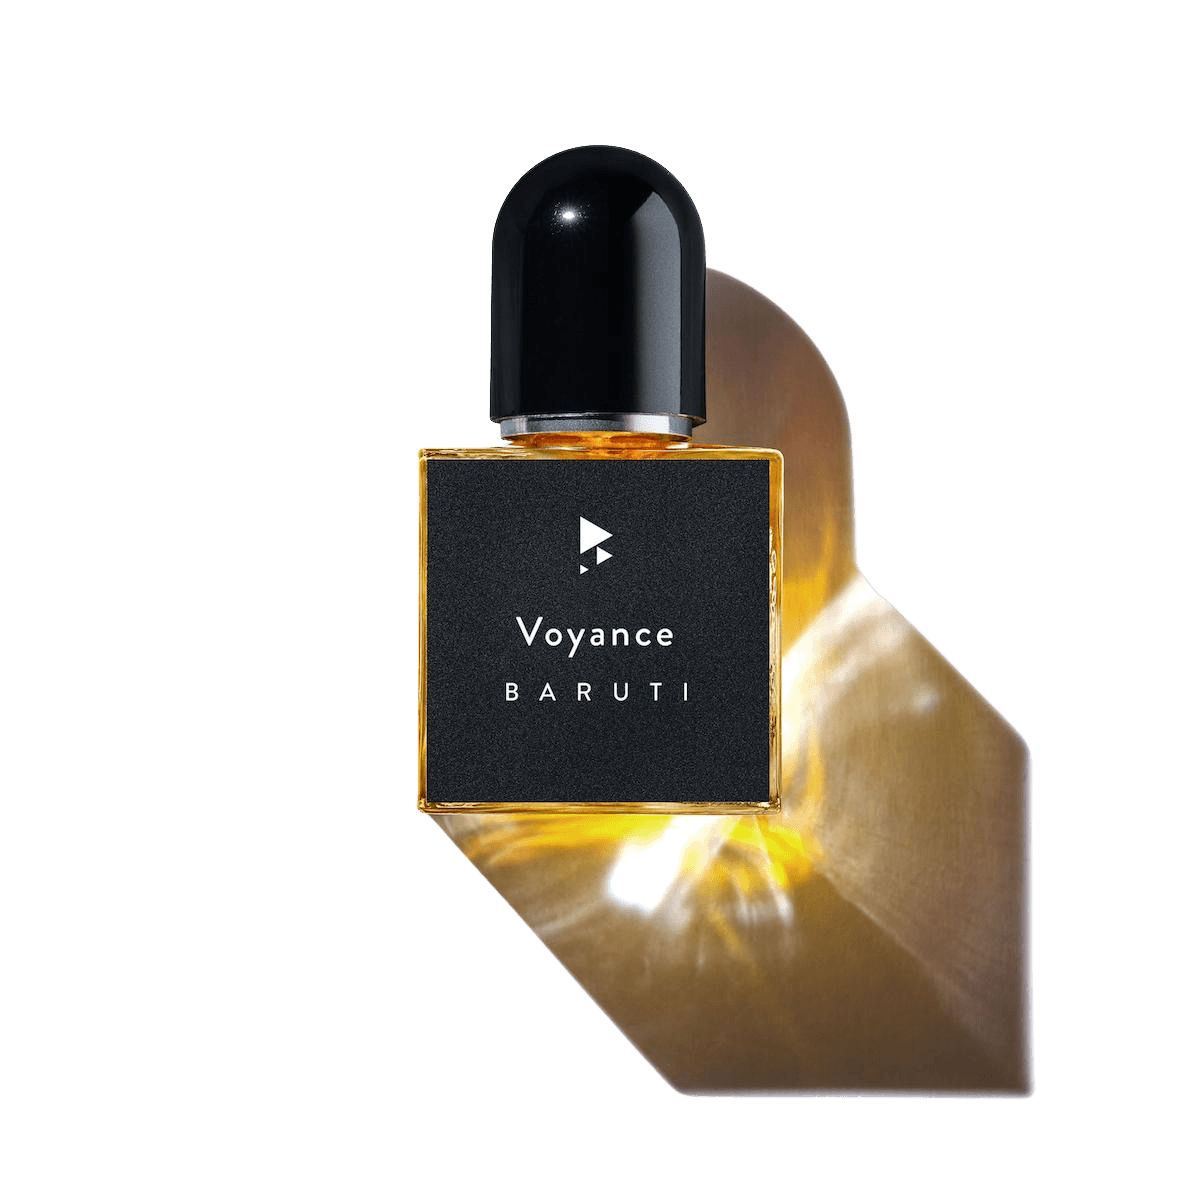 Image of the perfume Voyance by the brand Baruti